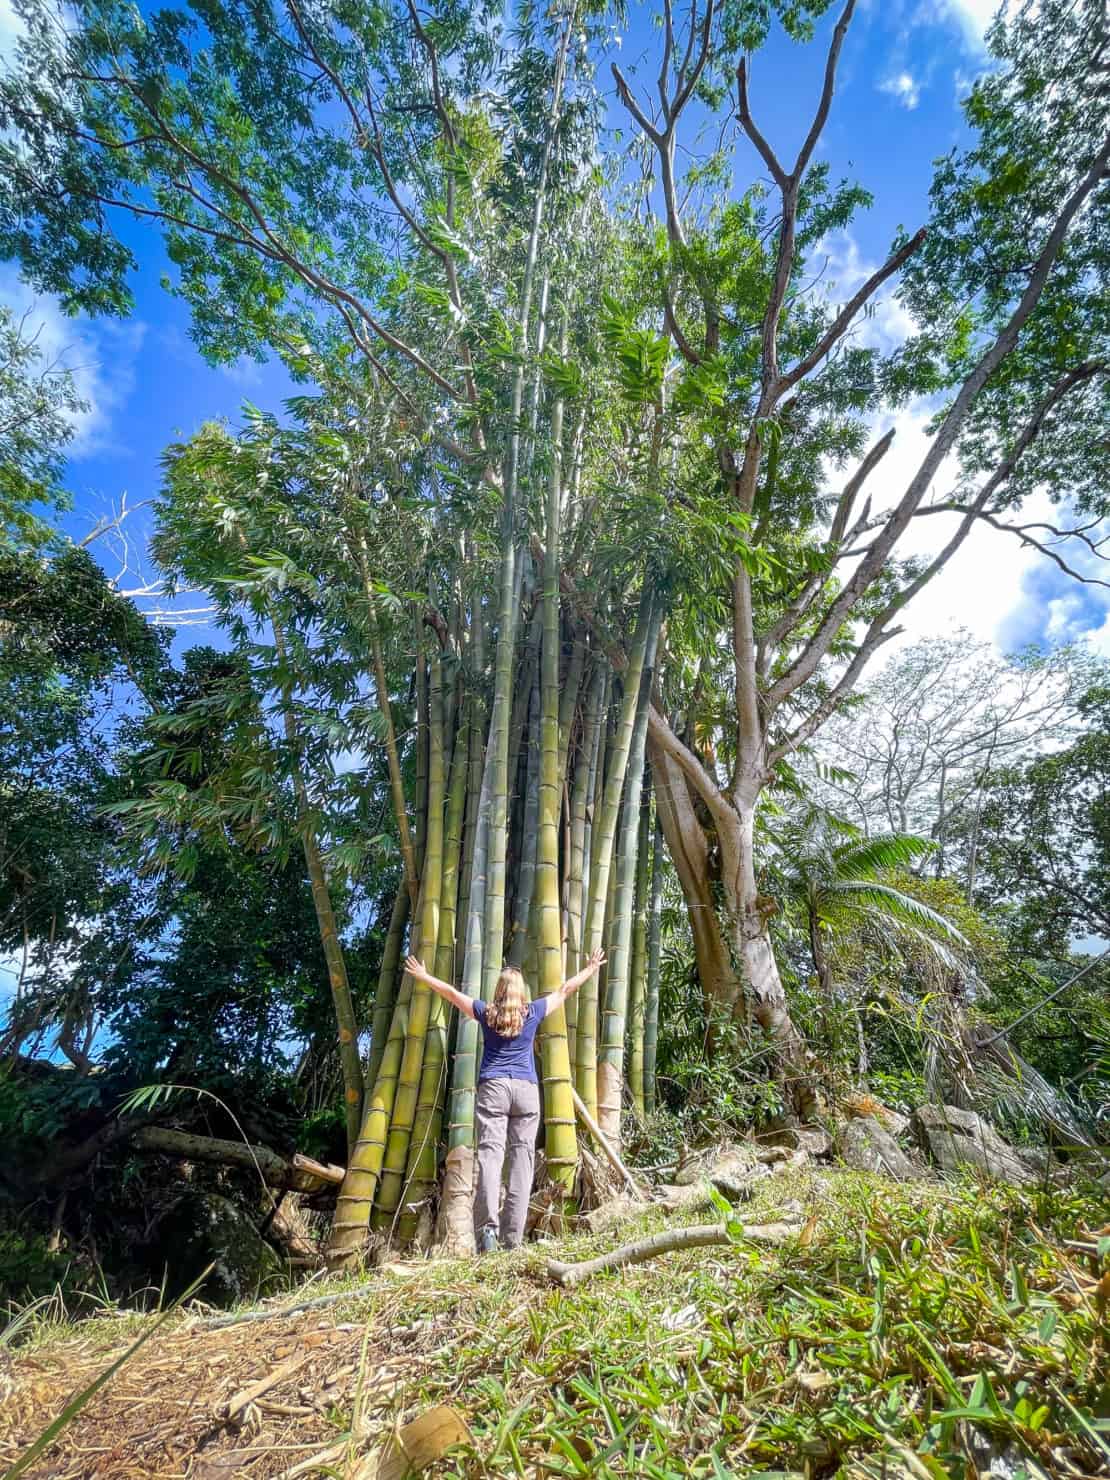 Abigail King reaching up to bamboo in Mauritius Africa